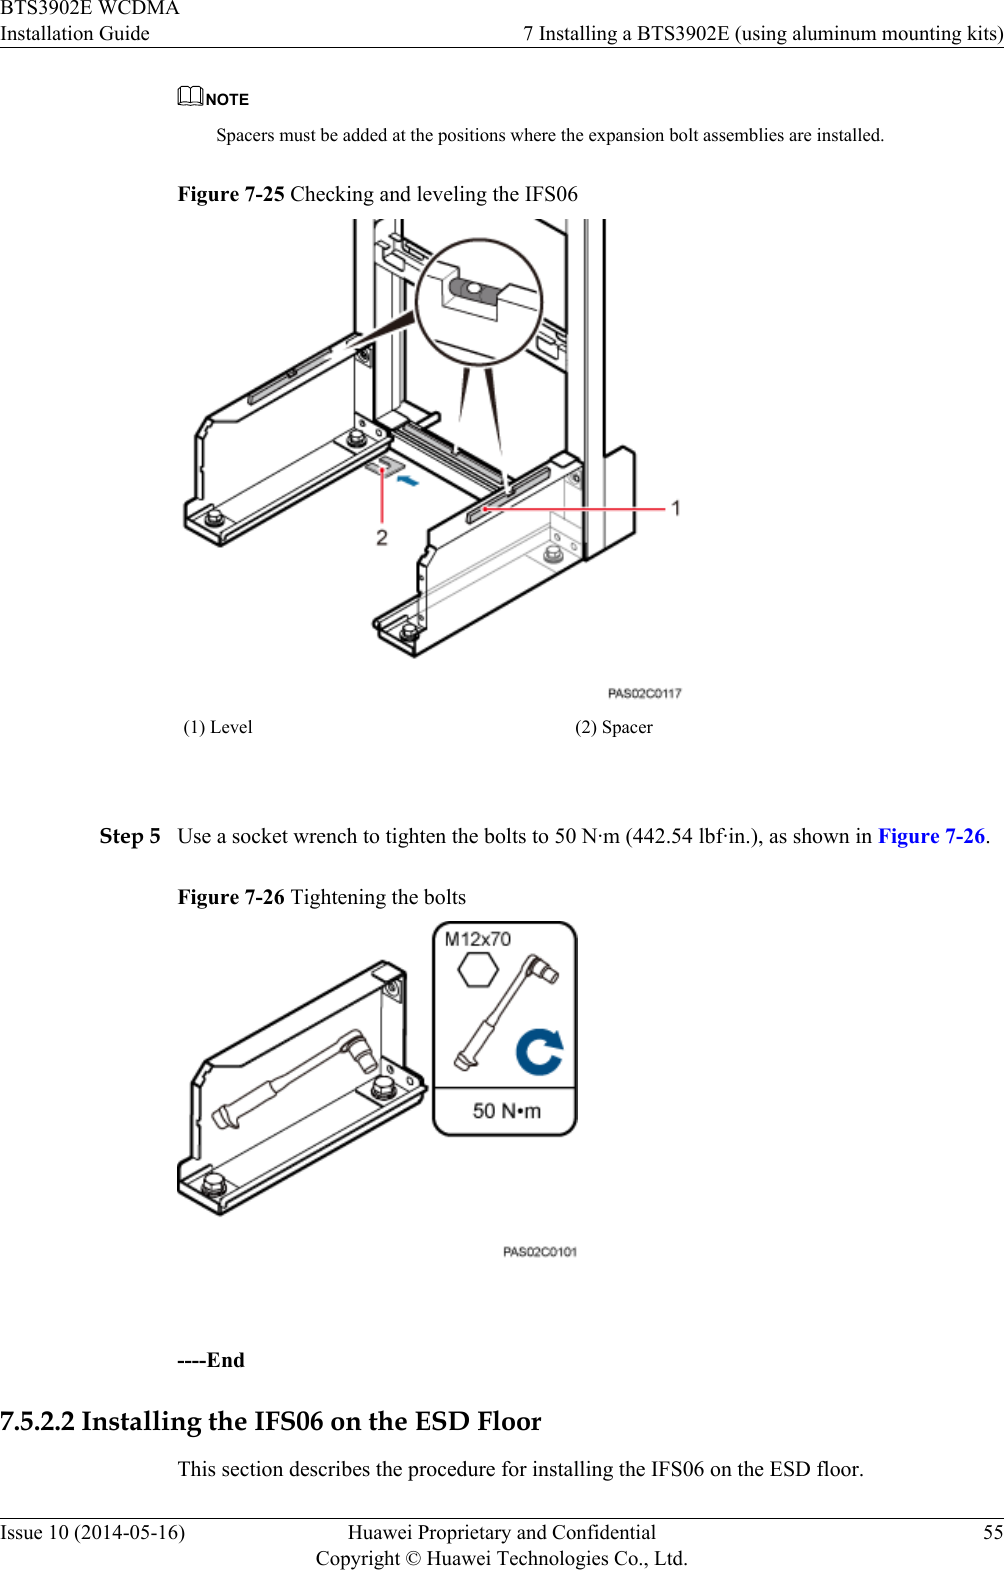 NOTESpacers must be added at the positions where the expansion bolt assemblies are installed.Figure 7-25 Checking and leveling the IFS06(1) Level (2) Spacer Step 5 Use a socket wrench to tighten the bolts to 50 N·m (442.54 lbf·in.), as shown in Figure 7-26.Figure 7-26 Tightening the bolts ----End7.5.2.2 Installing the IFS06 on the ESD FloorThis section describes the procedure for installing the IFS06 on the ESD floor.BTS3902E WCDMAInstallation Guide 7 Installing a BTS3902E (using aluminum mounting kits)Issue 10 (2014-05-16) Huawei Proprietary and ConfidentialCopyright © Huawei Technologies Co., Ltd.55